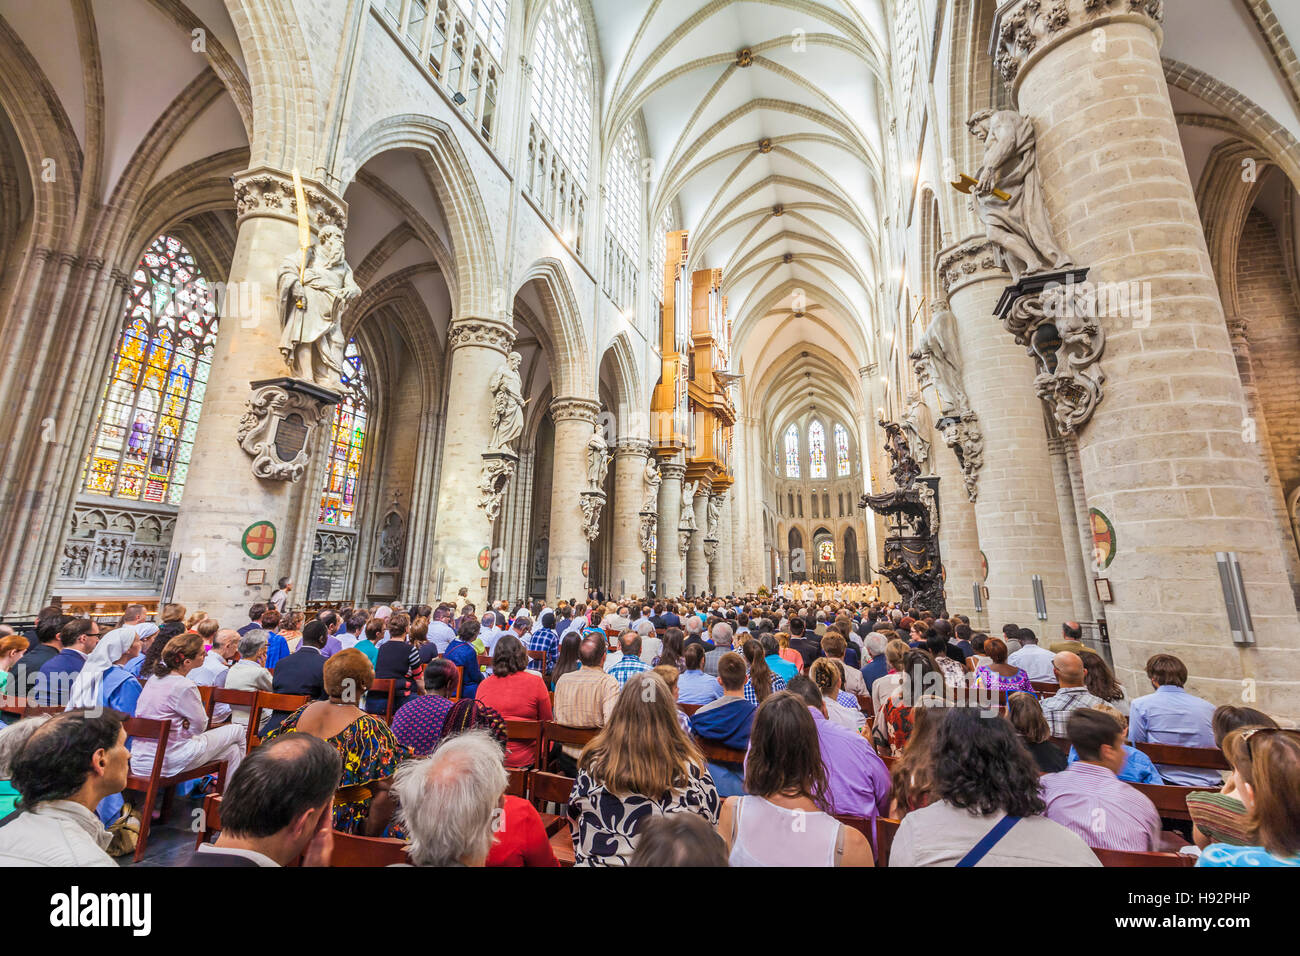 PEOPLE AT THE CATHEDRAL OF ST. MICHAEL AND ST. GUDULA, CATHEDRALE SAINT-MICHEL, GOTHIC STYLE, CITY, BRUSSELS, BELGIUM Stock Photo